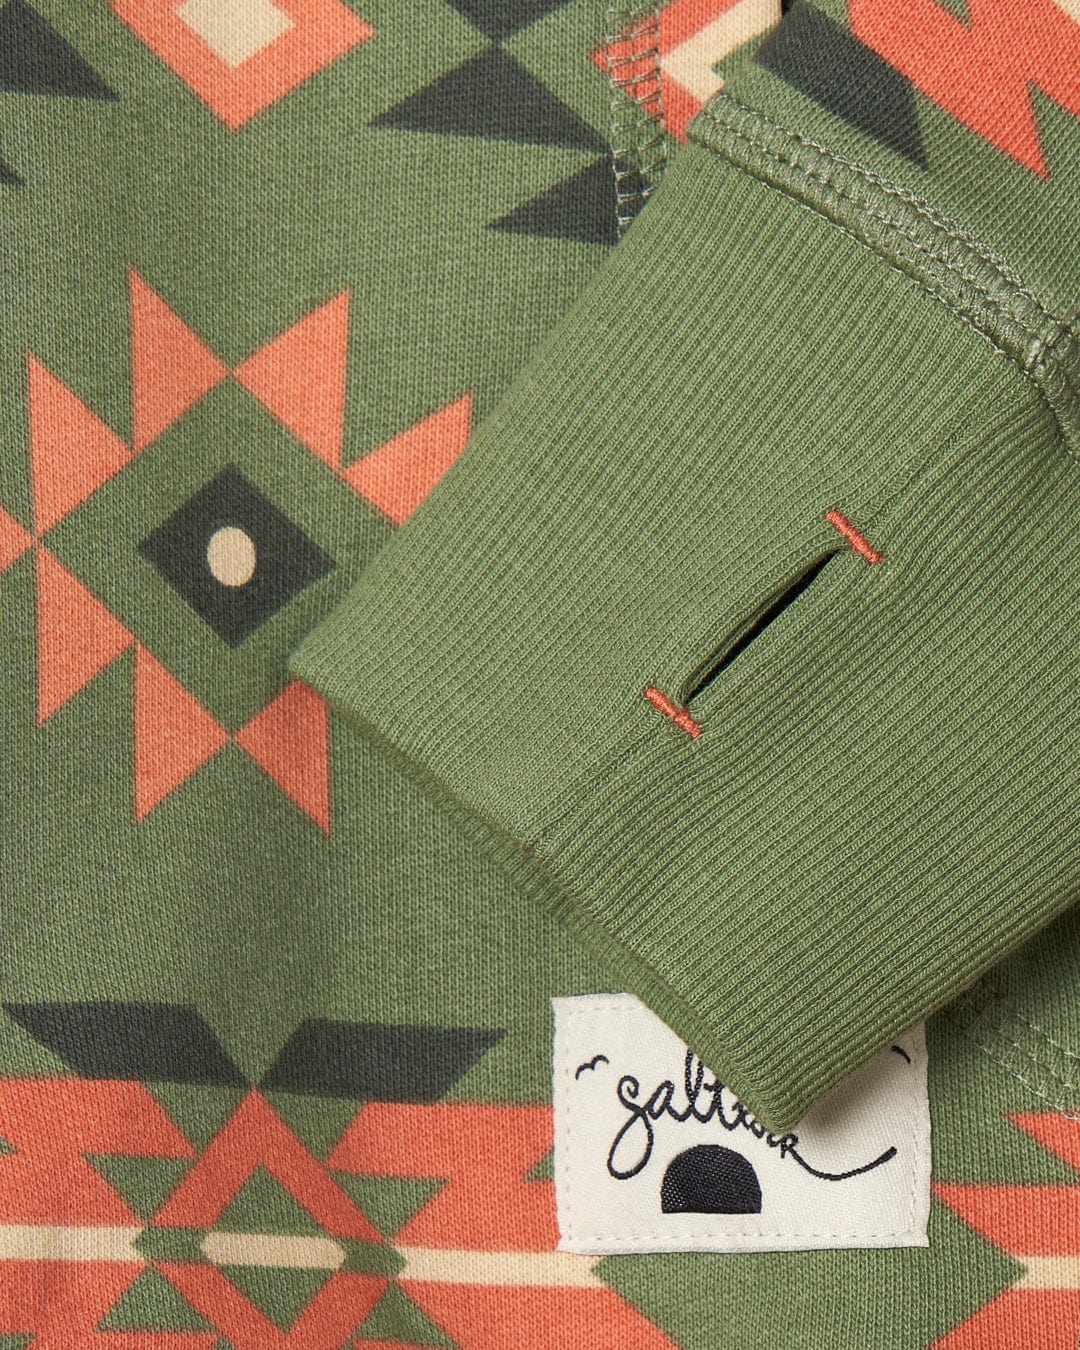 A close up of a Aztec Santano - Womens Pop Hoodie in Green/Orange from Saltrock, made of soft cotton fabric.